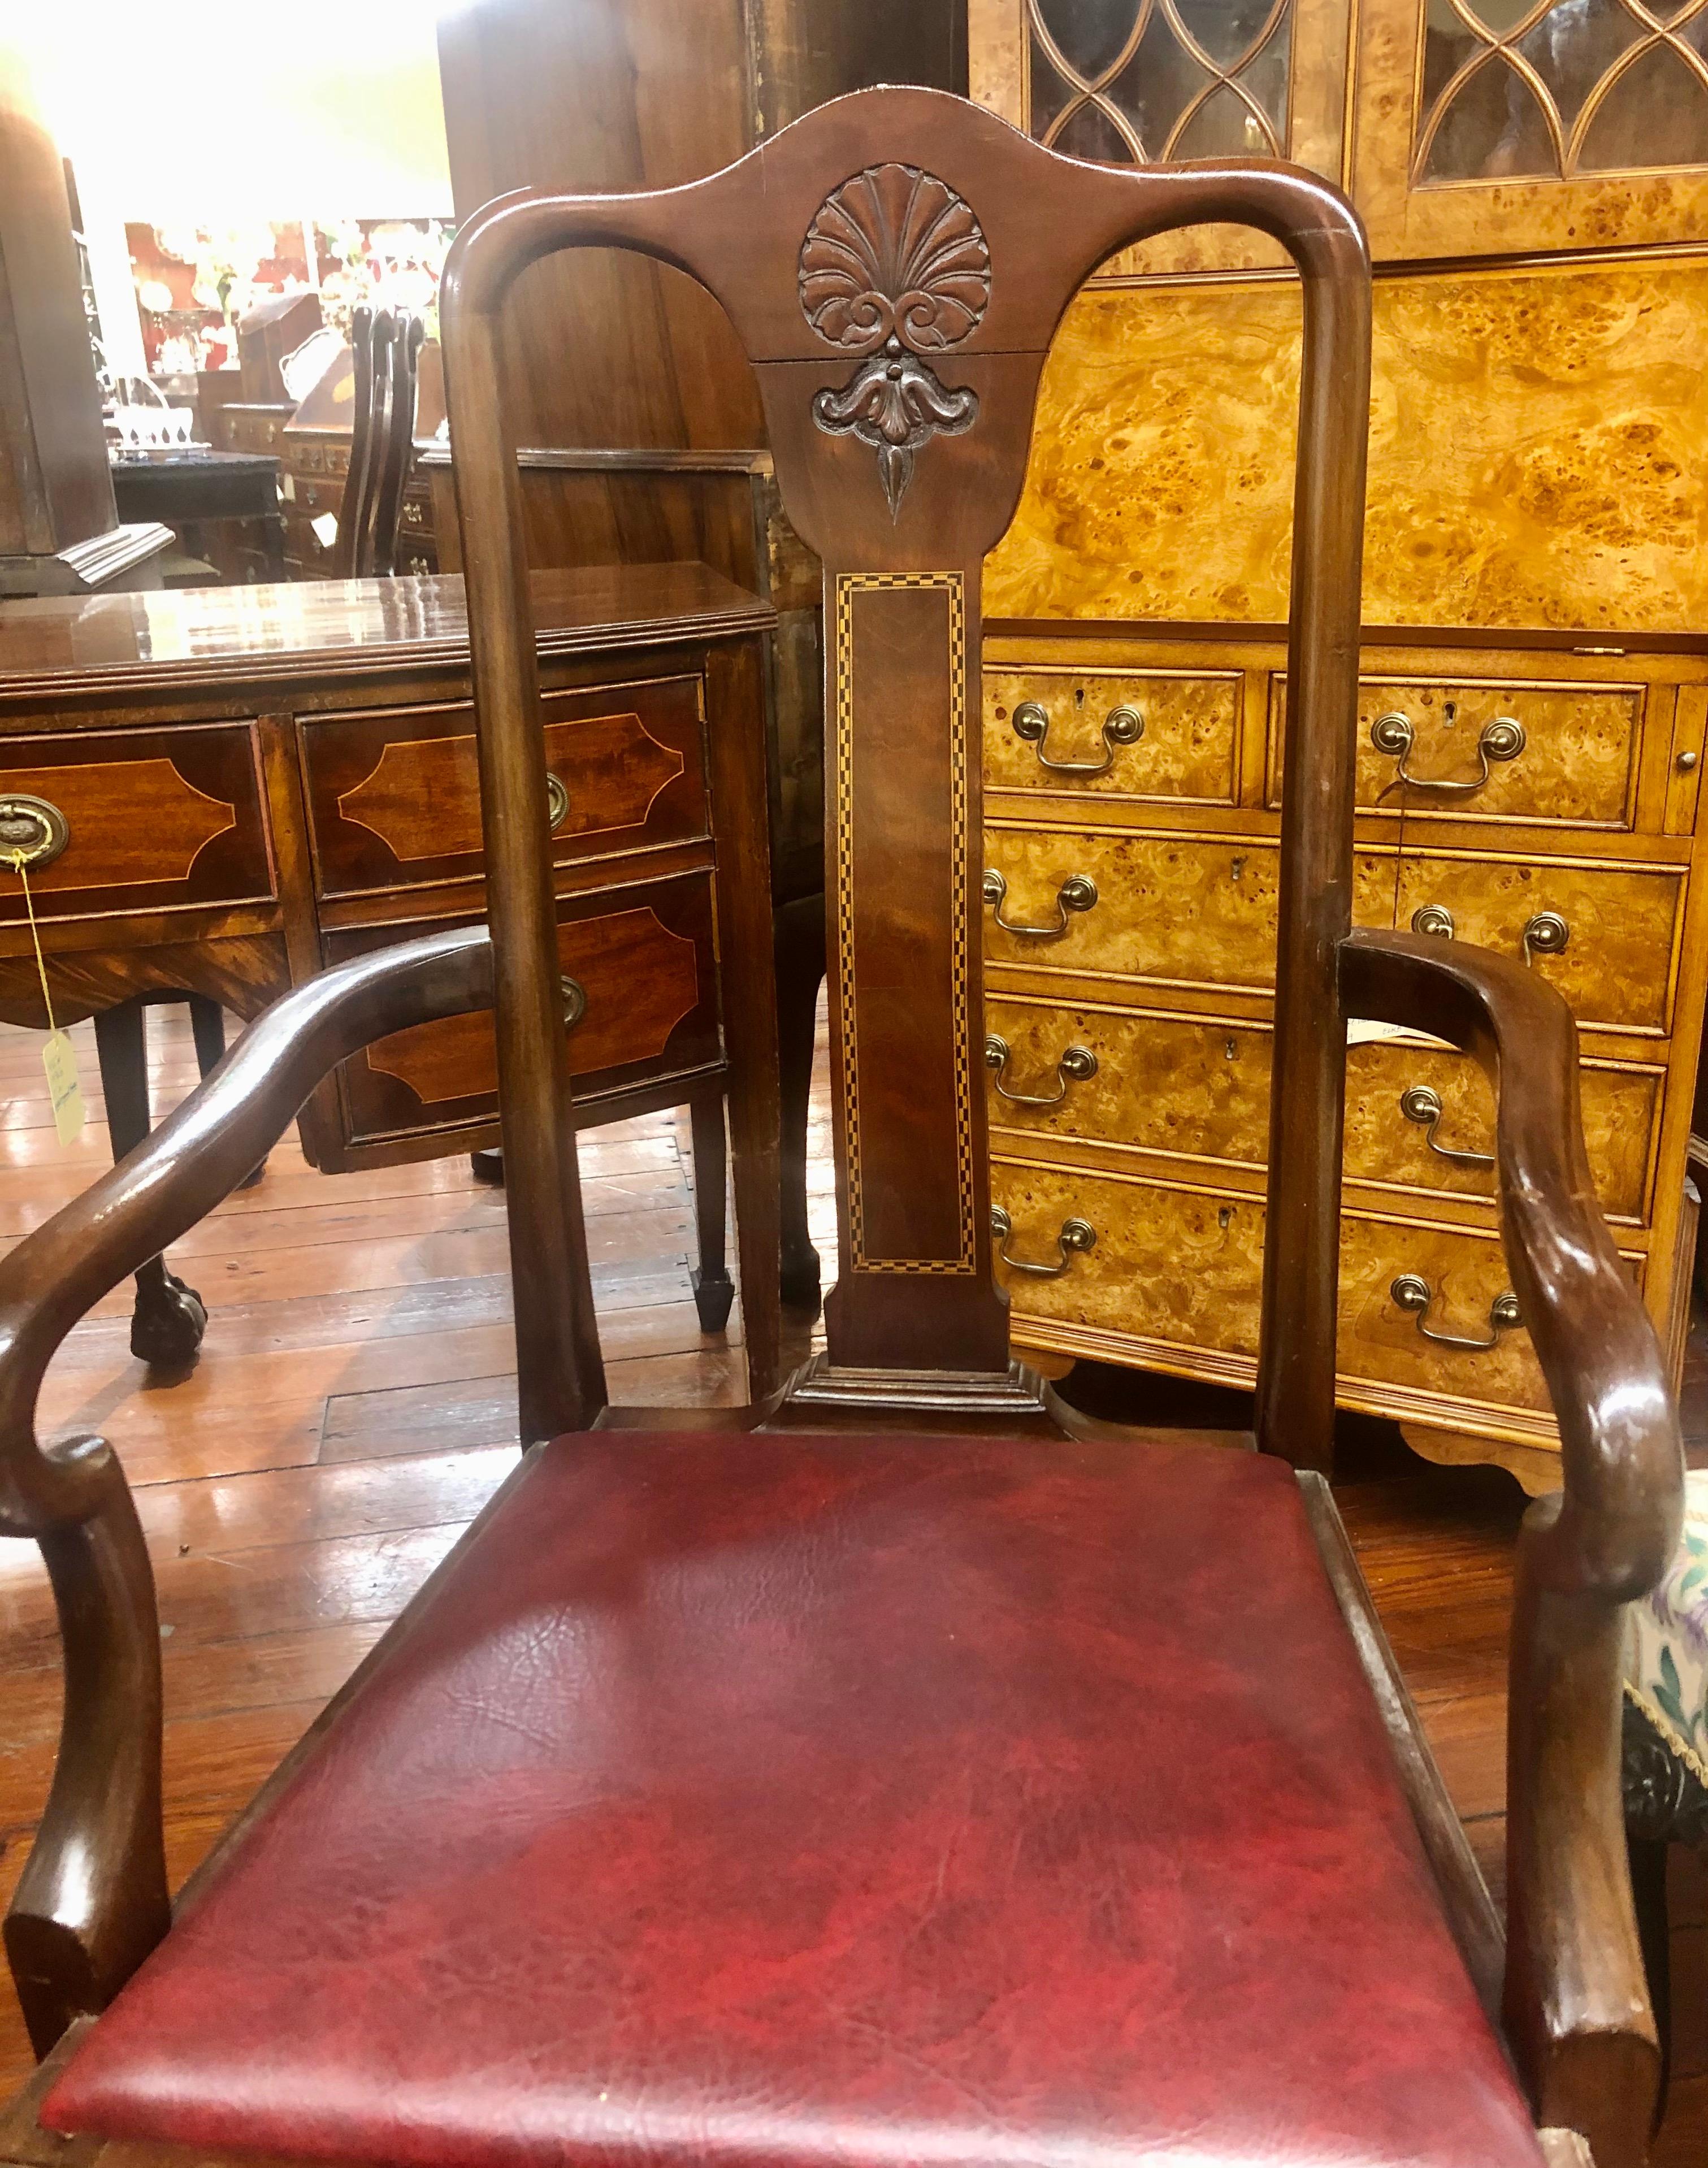 A very fine and unusual set of six (4 sides, 2 arms) antique English inlaid and hand carved solid mahogany Queen Anne style dining chairs with a lovely, comfortably curved, rectangular, flame mahogany back splat with checkered inlay. The crestrail